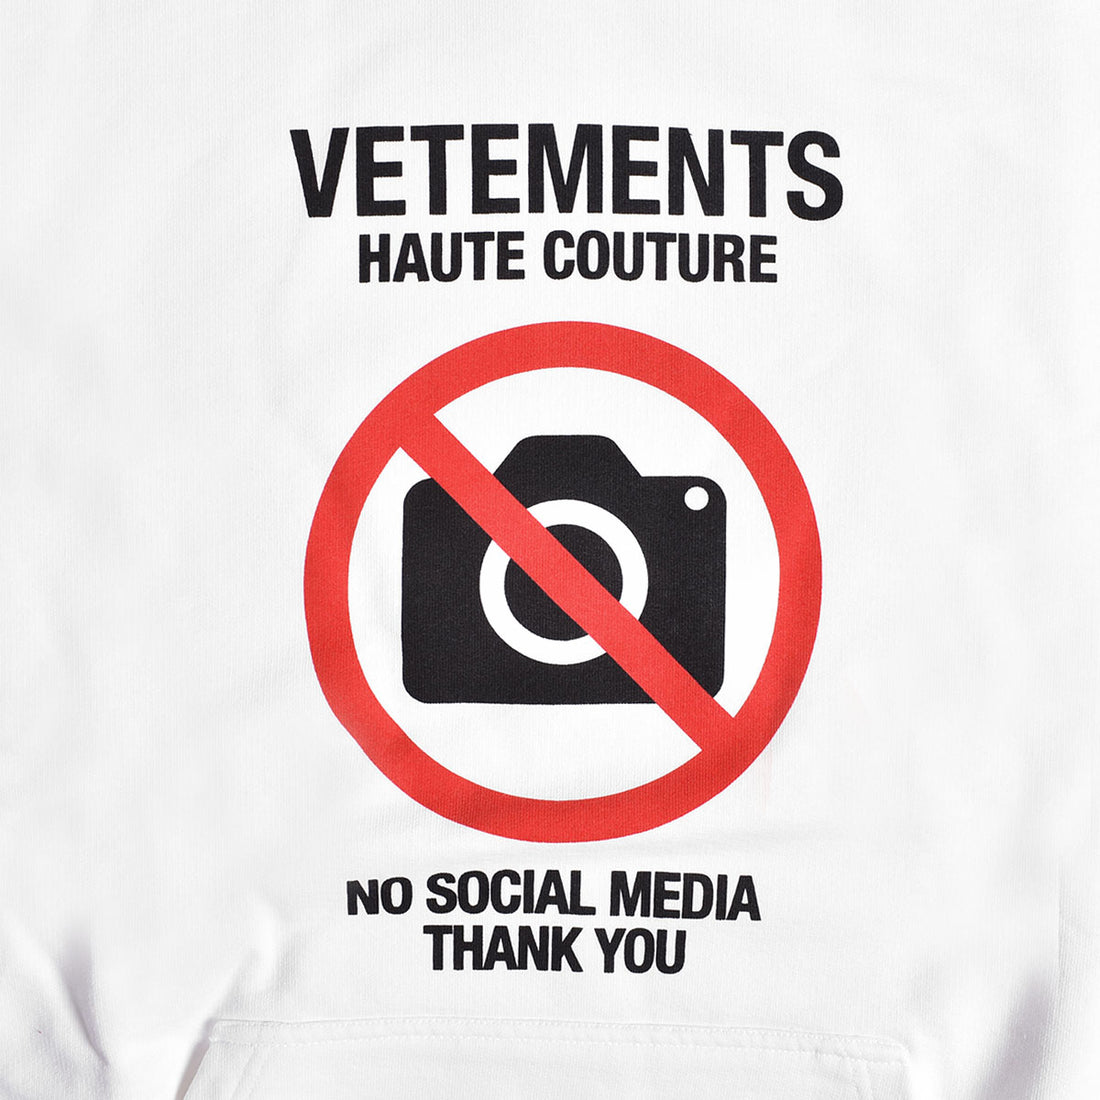 [VETEMENTS]NO SOCIAL MEDIA COUTURE HOODIE/WHITE(UE54HD380)